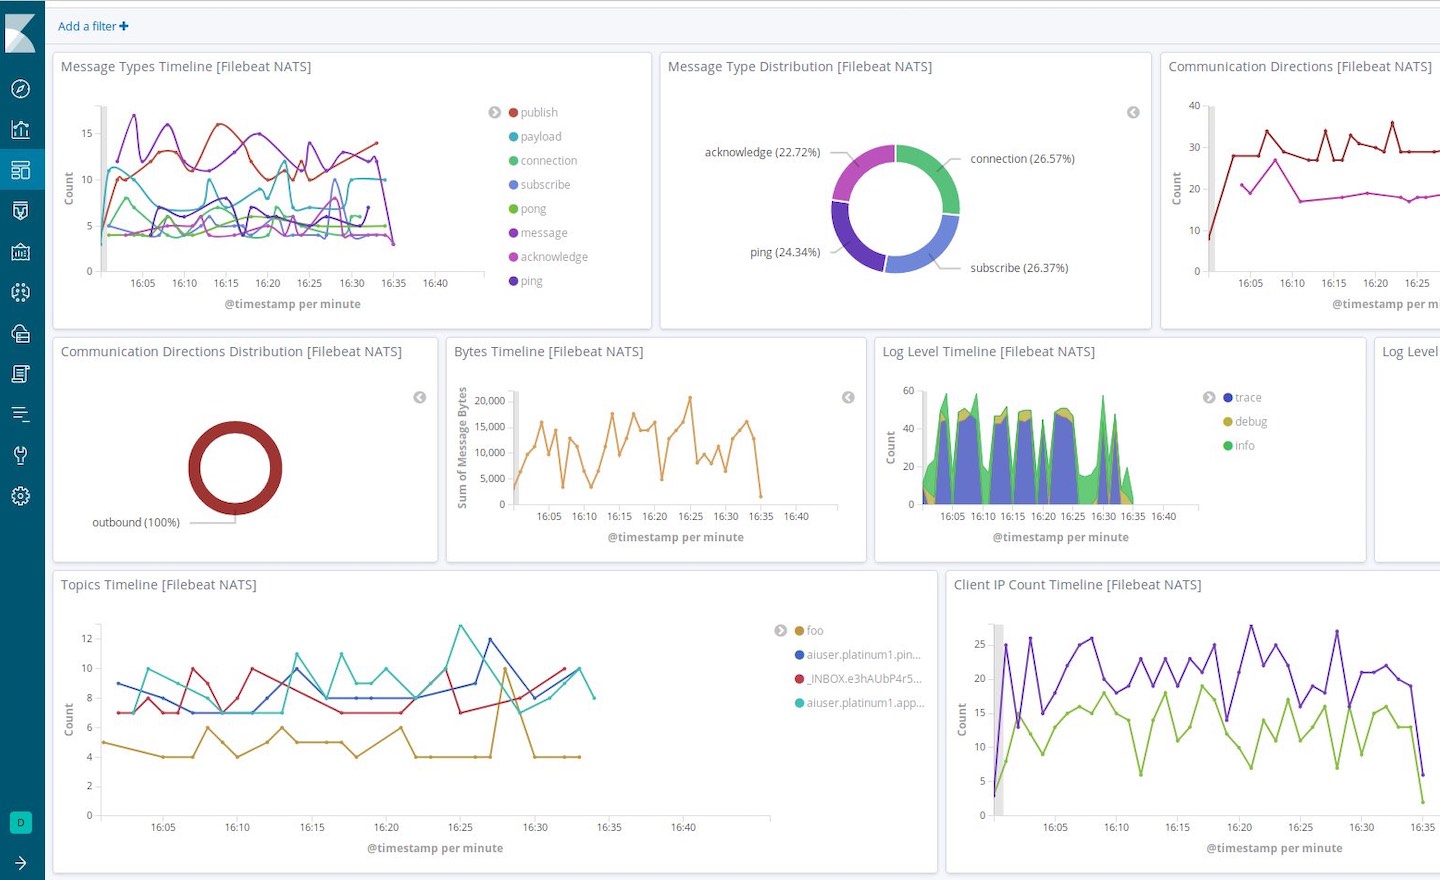 Elastic Stack 7.2.0 releases Elastic SIEM and general availability of  Elastic App Search